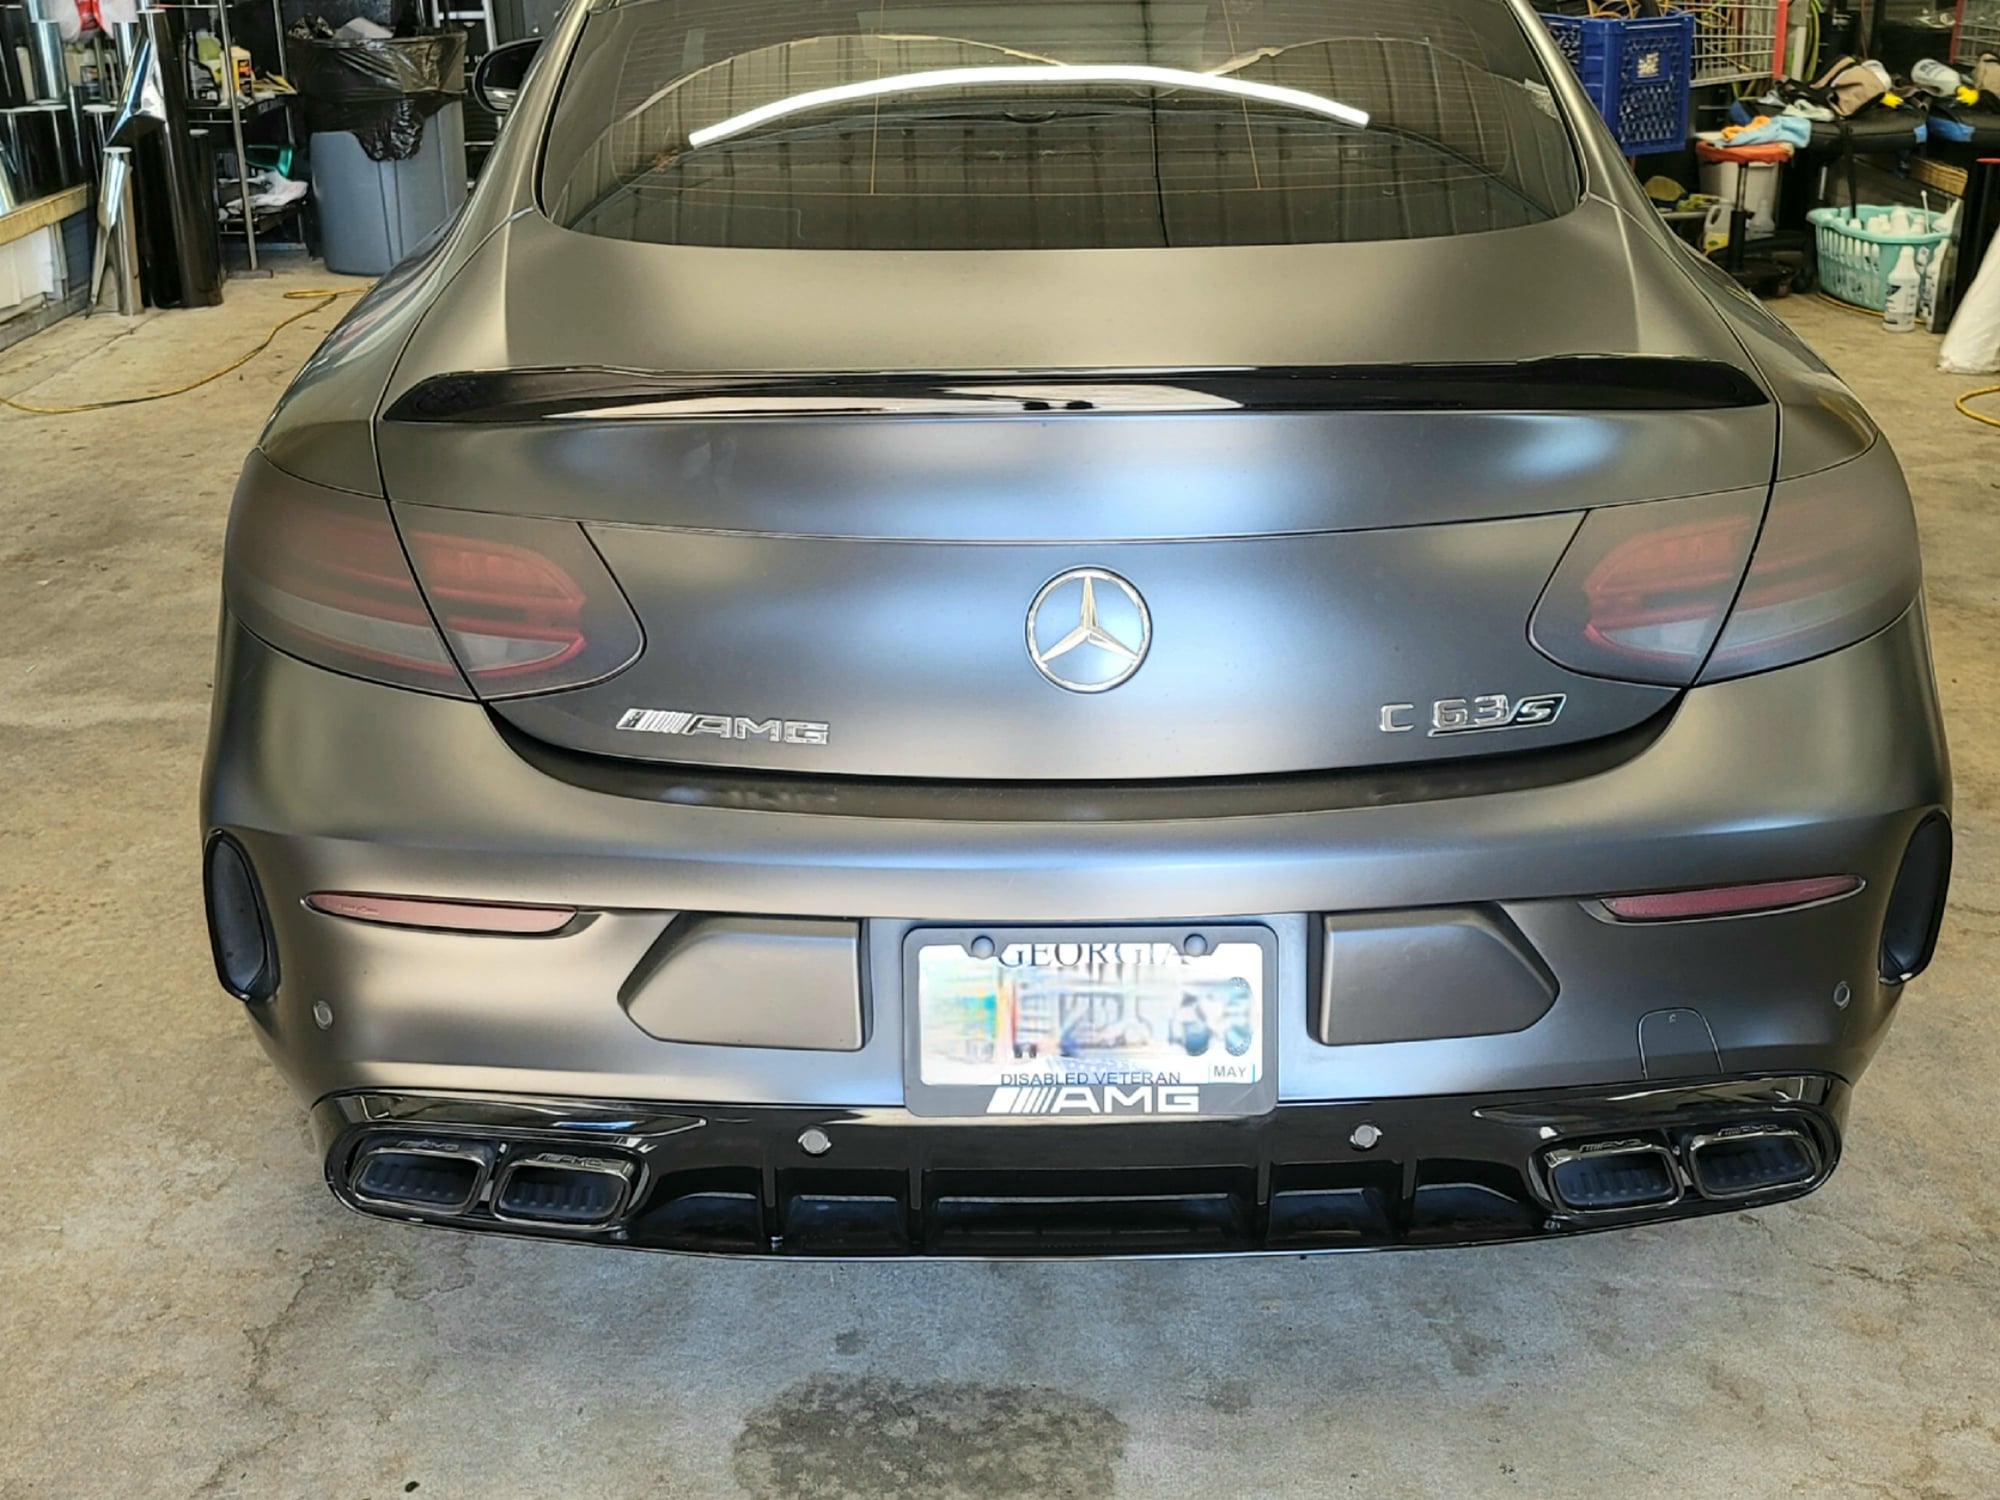 2020 Mercedes-Benz C63 AMG S - Reducing my debt and focusing more on my business - Used - VIN WDDWJ8HB0LF945677 - 38,000 Miles - 8 cyl - 2WD - Automatic - Coupe - Black - Grovetown, GA 30813, United States